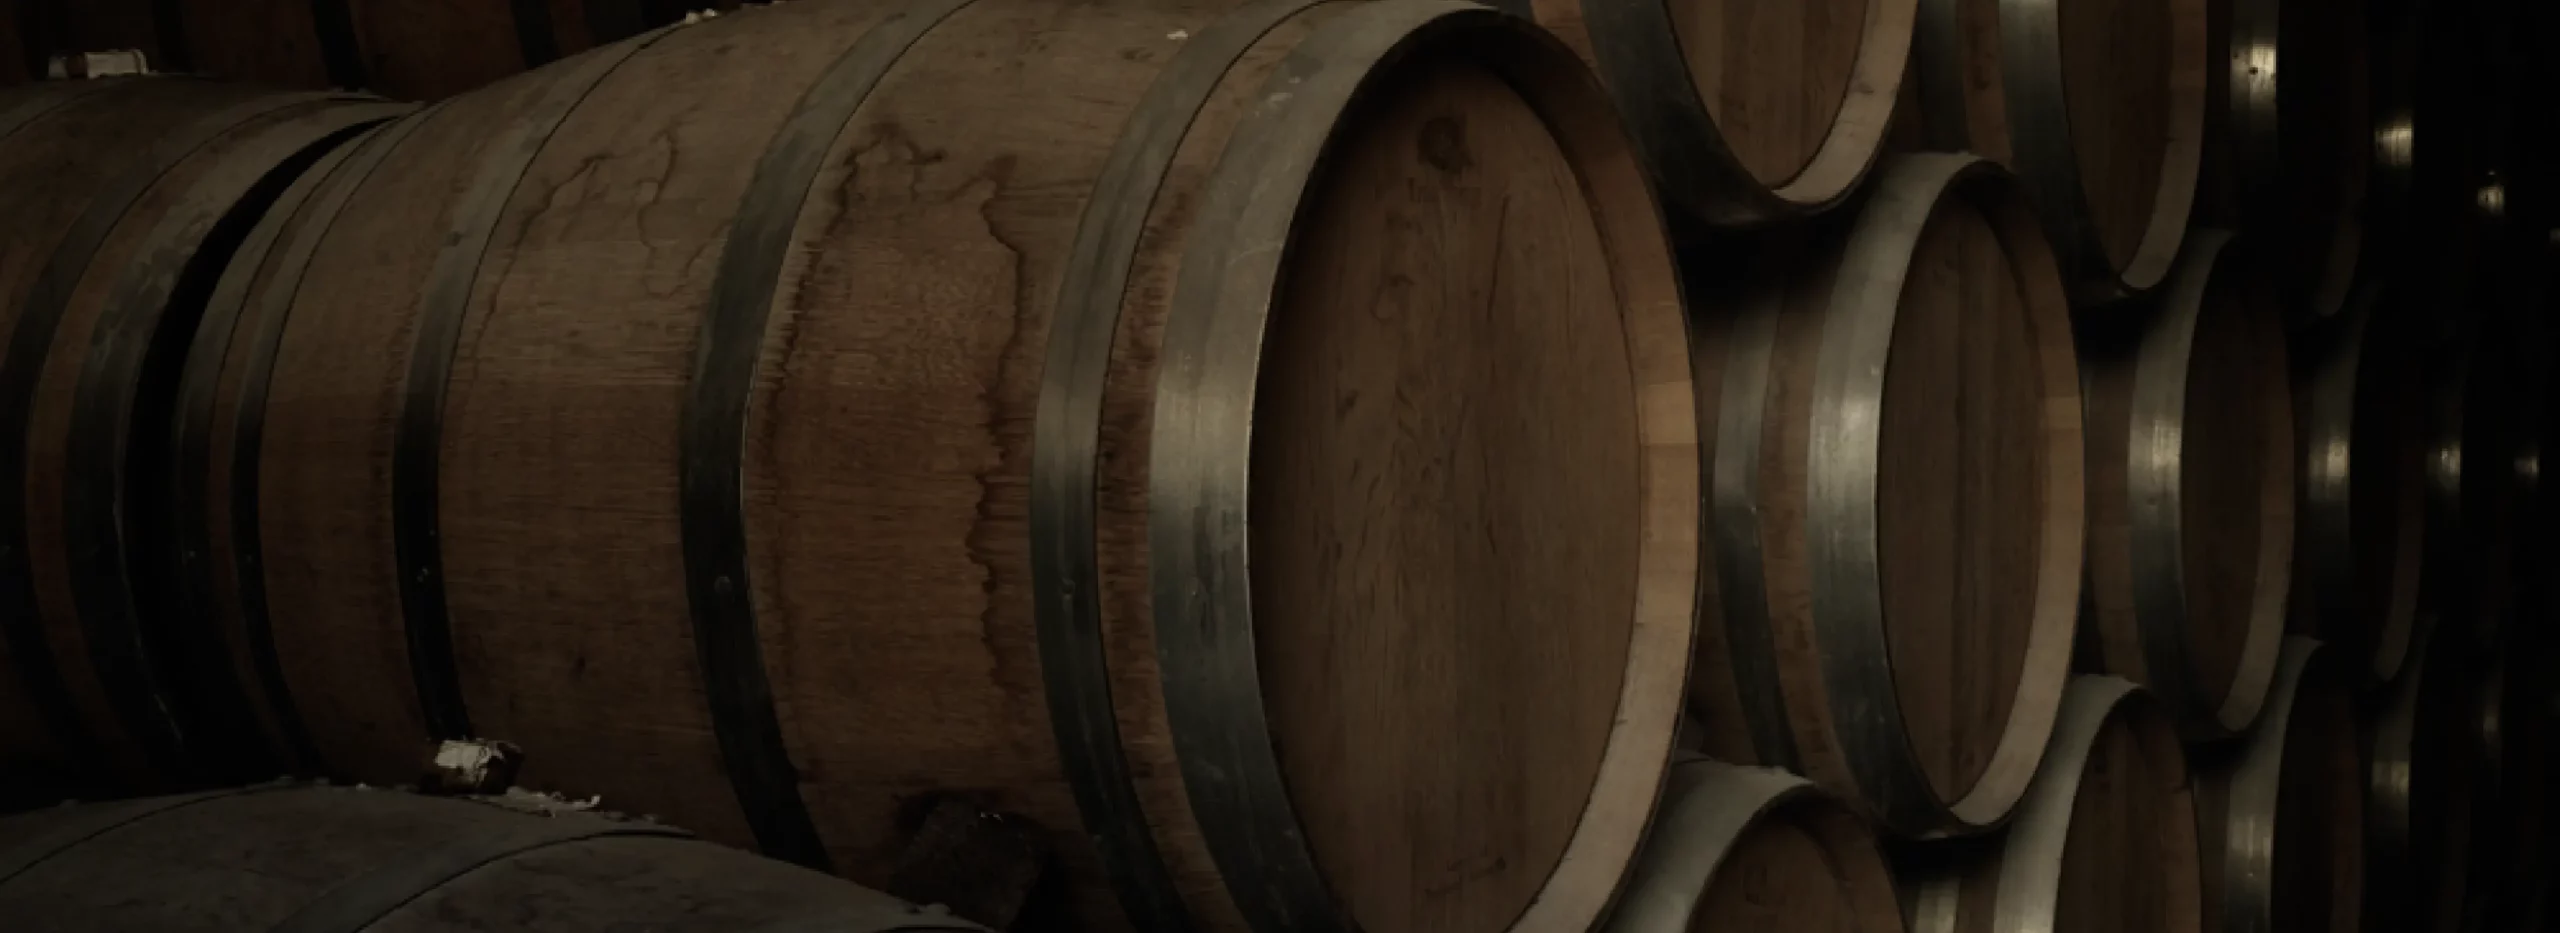 Why is tequila aged in barrels?